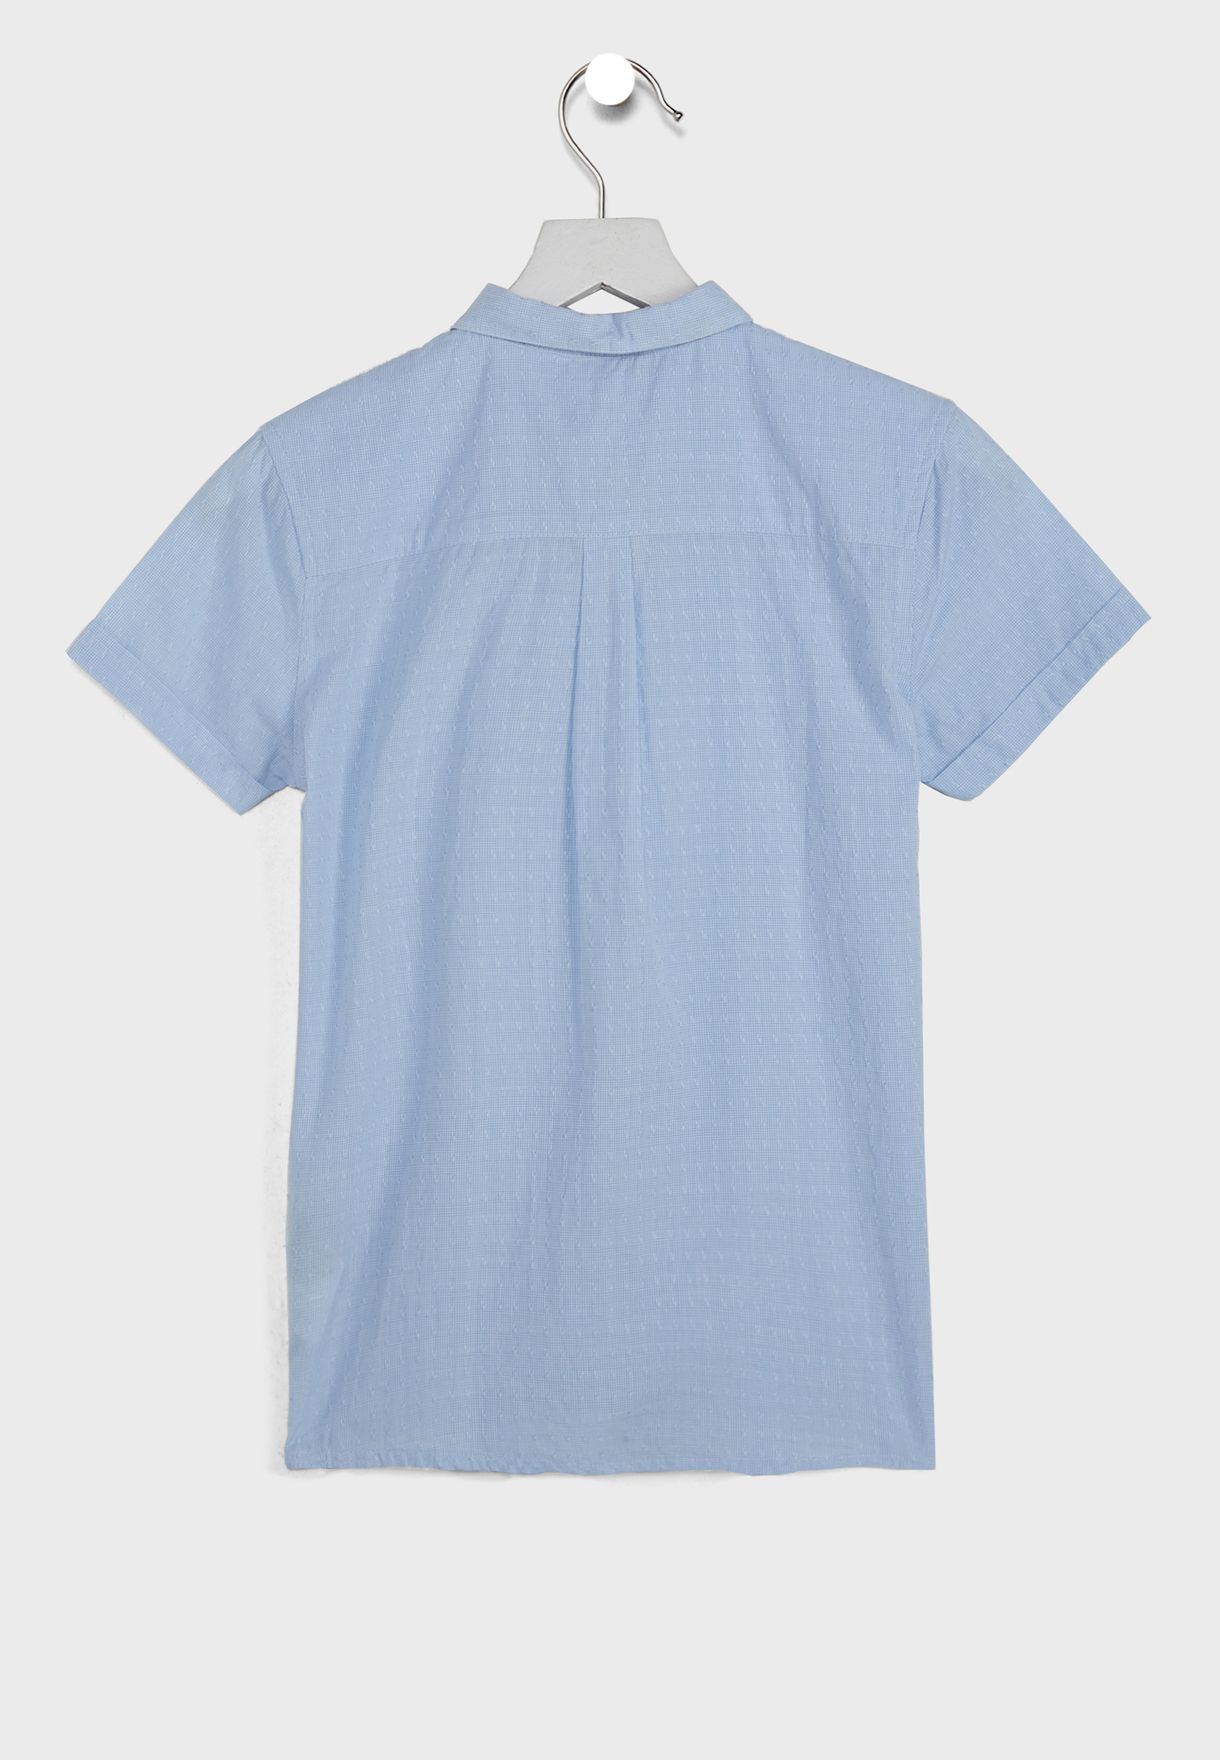 Kids Essential Shirt With Bow